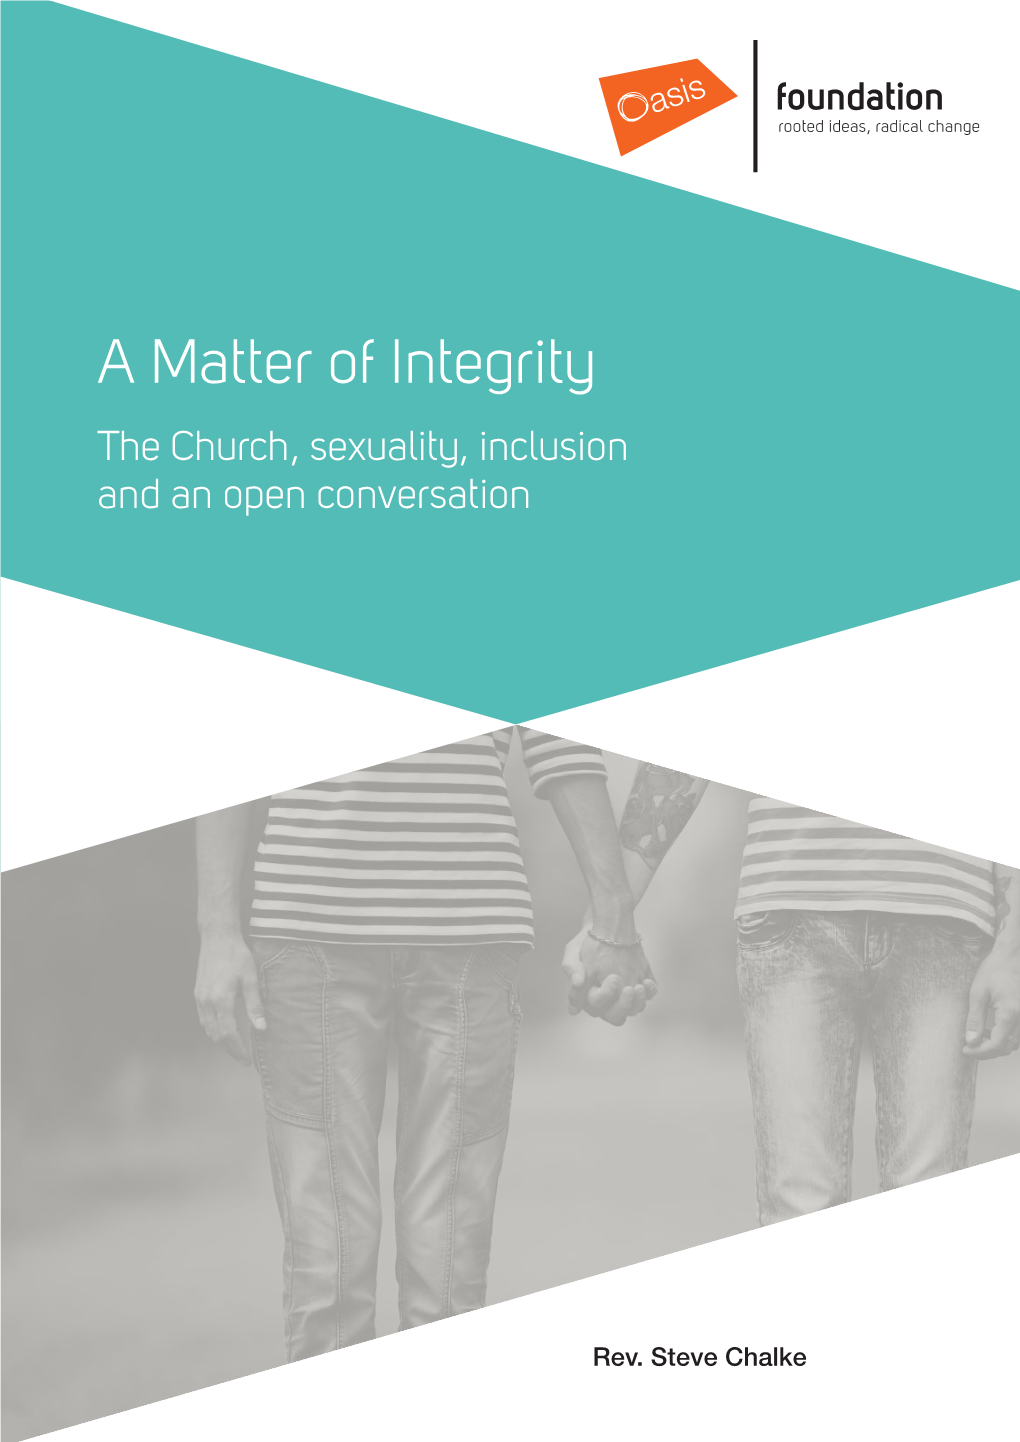 A Matter of Integrity the Church, Sexuality, Inclusion and an Open Conversation